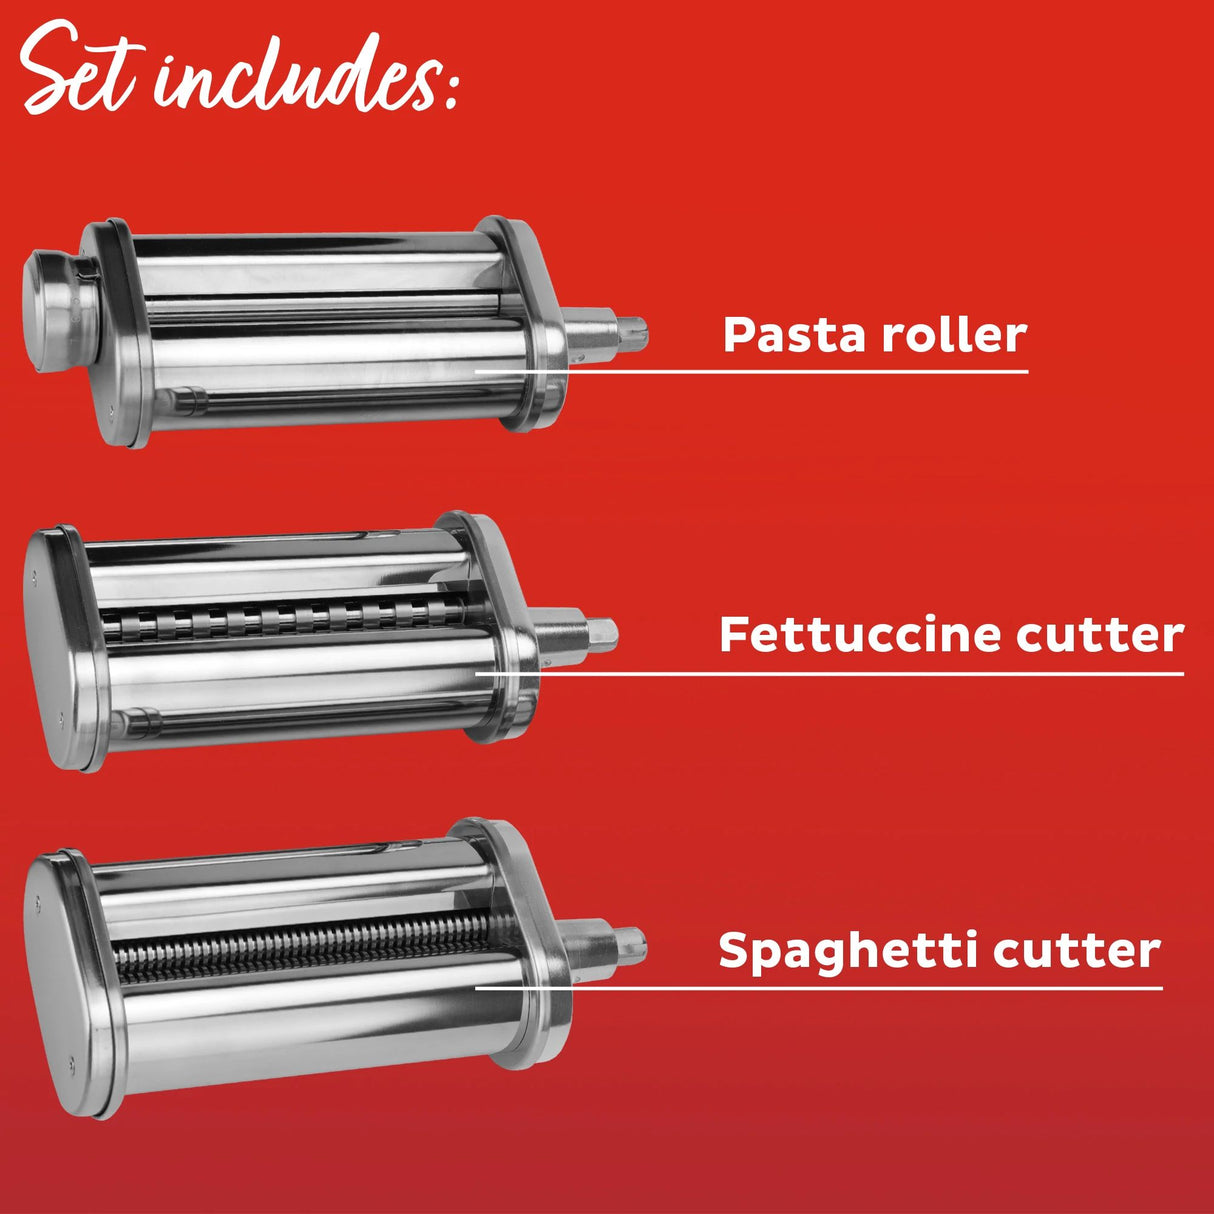  Instant® Pasta Accessory parts text set includes pasta roller, spaghetti cutter &amp; fettuccine cutter